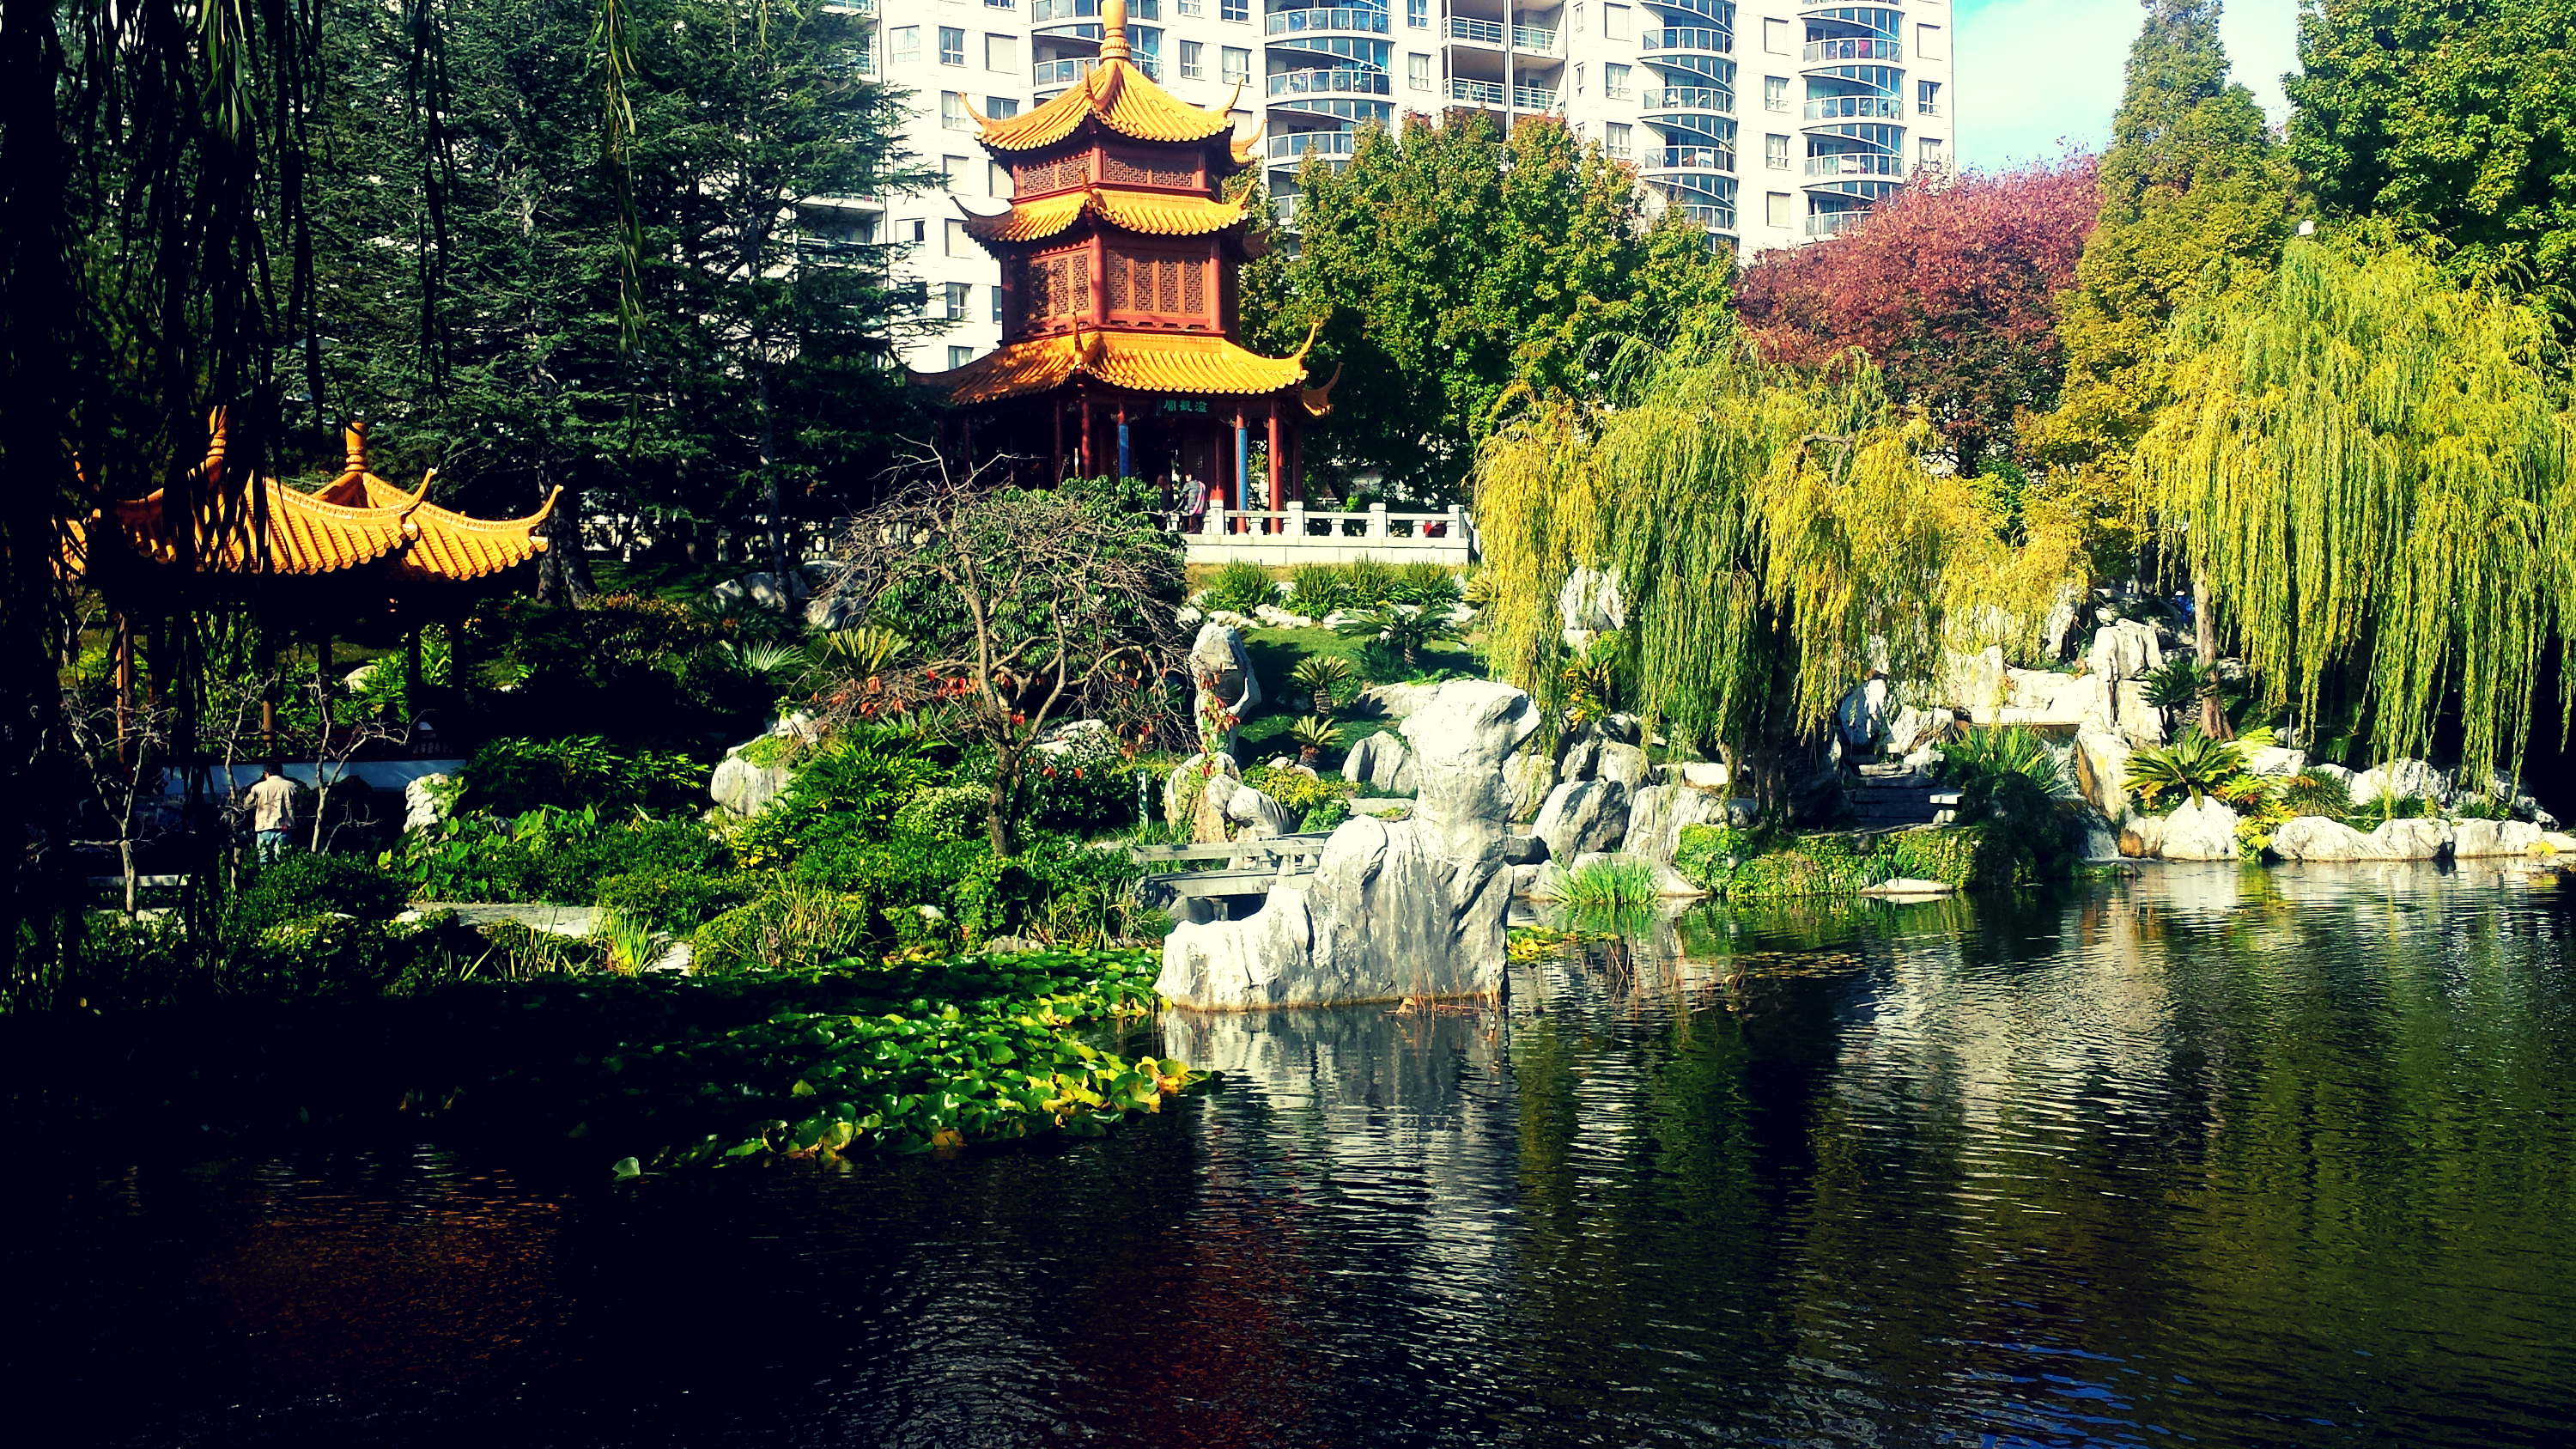 A large lake is in the front of the picture and behind this is various oriental plants, rocks and decorative features. On top of a hill stands a red and gold Chinese pagoda